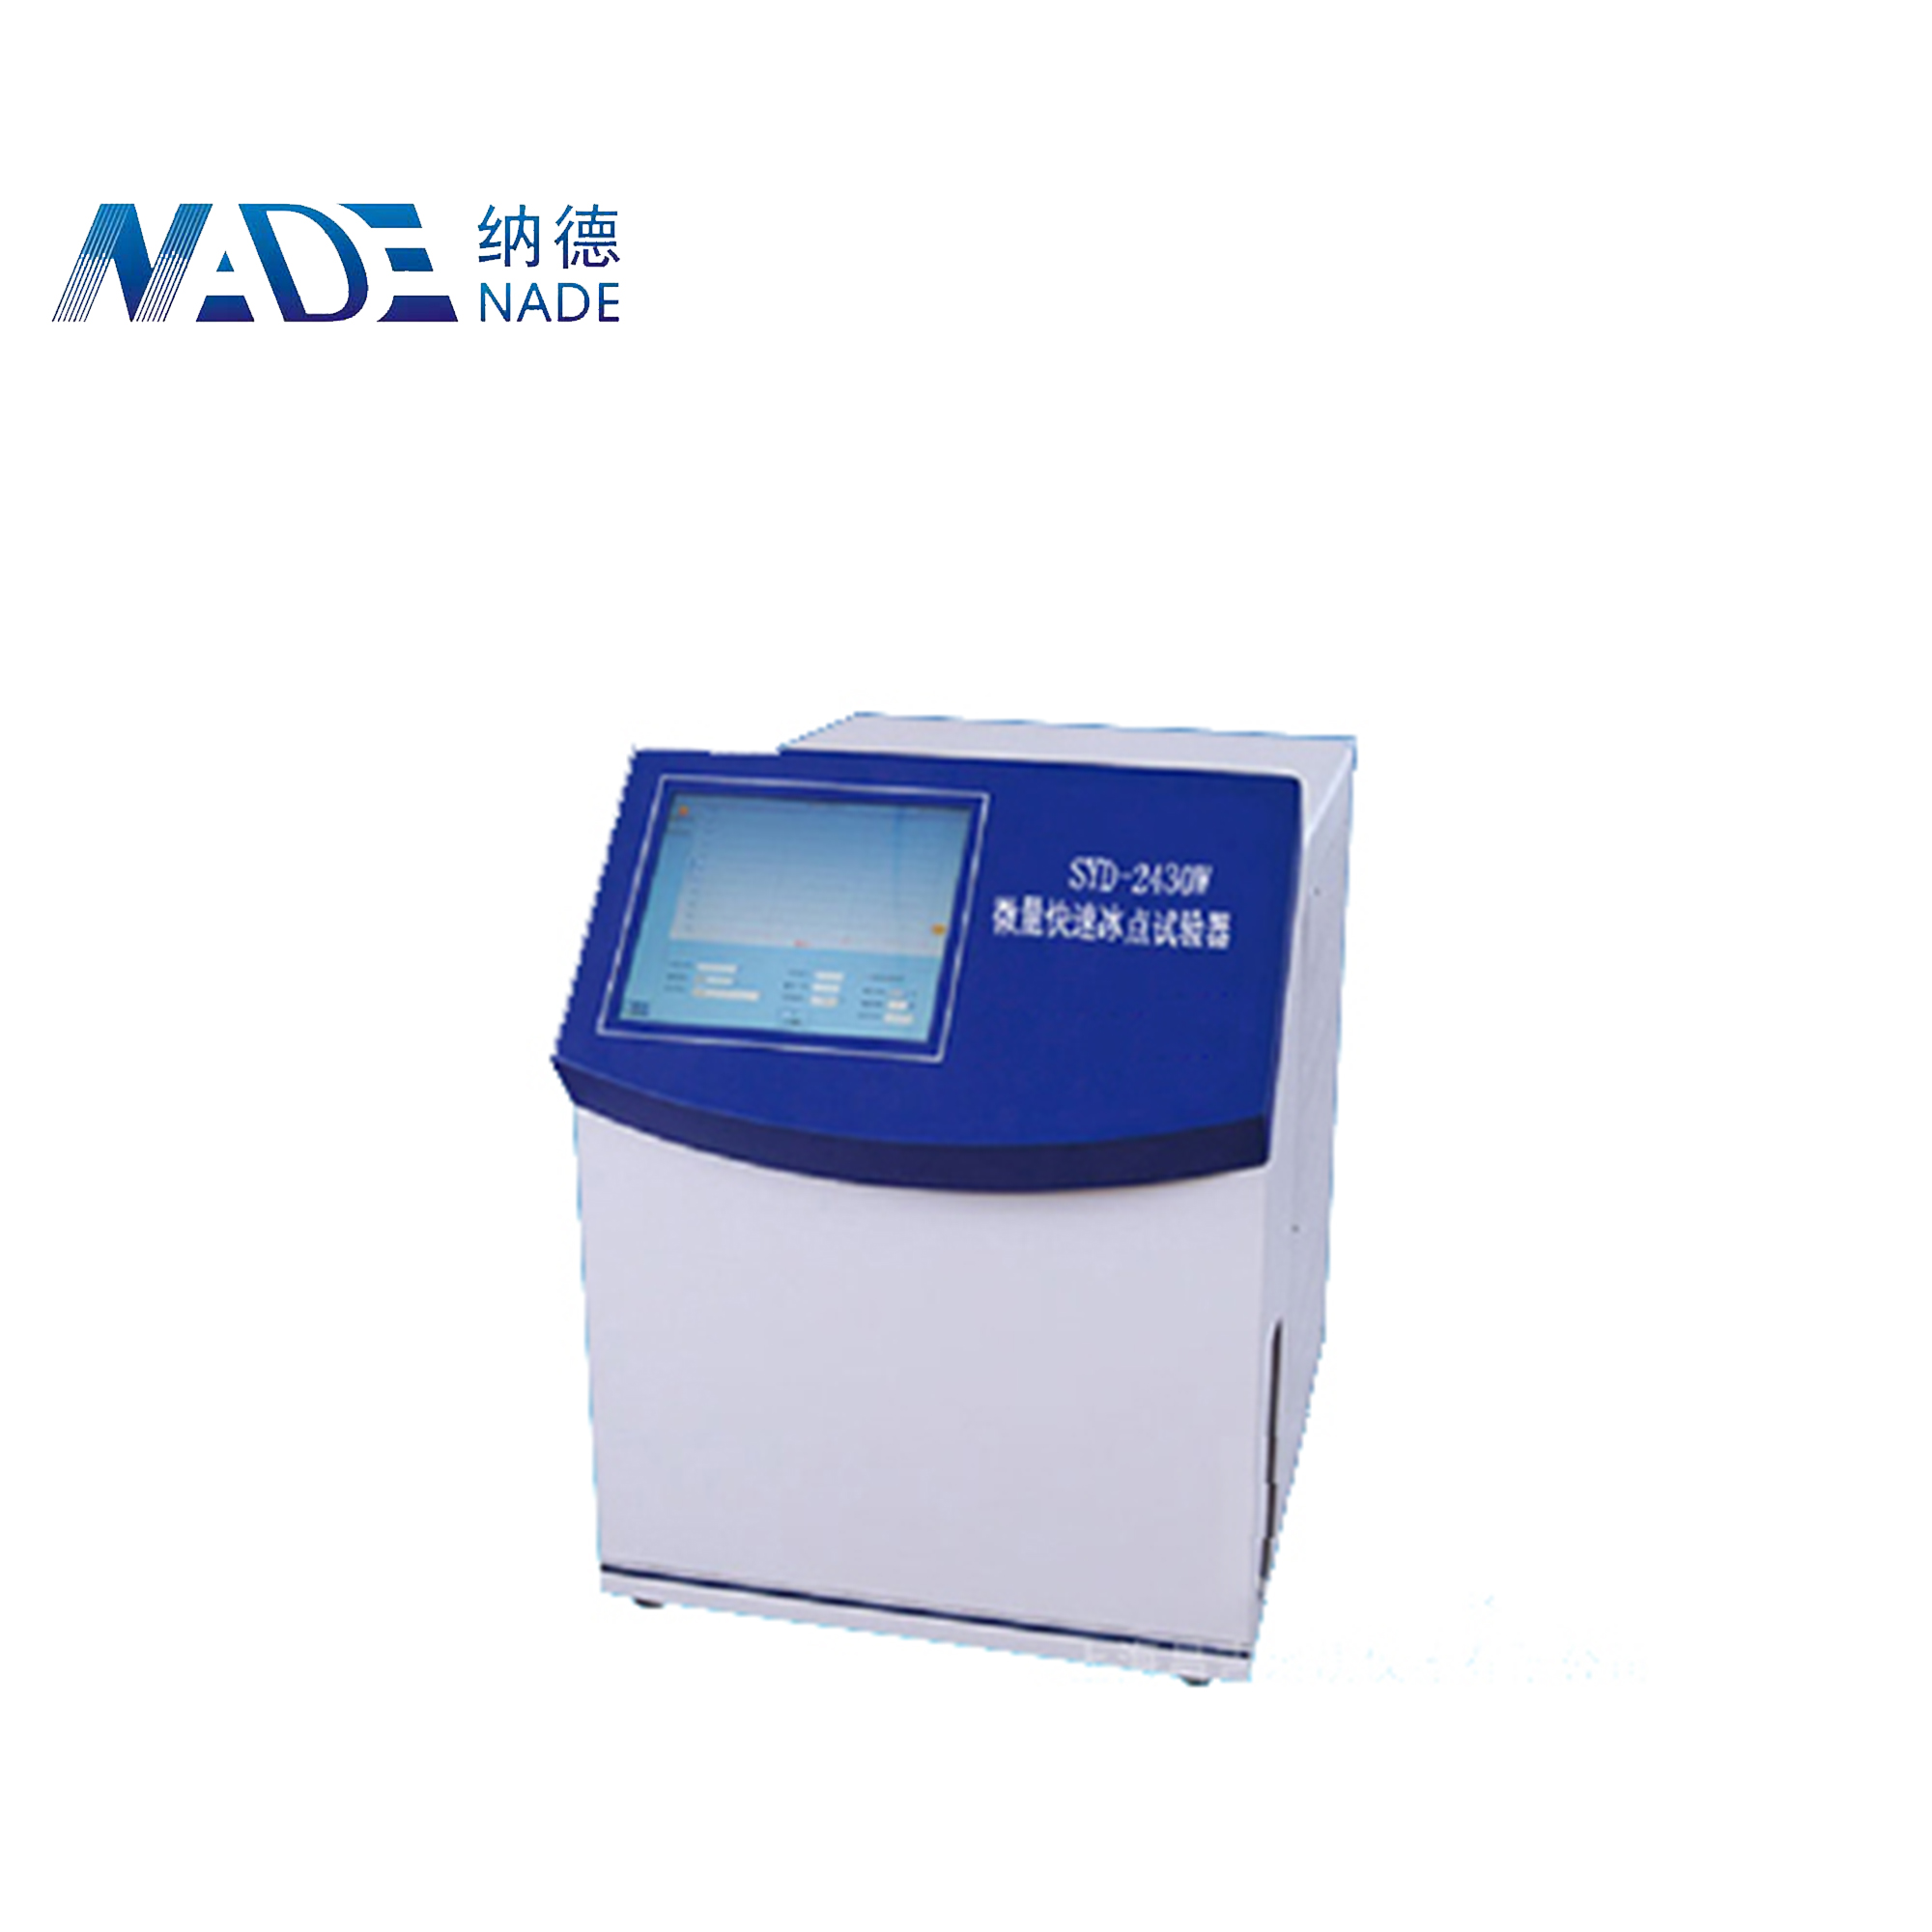 NADE SYD-2430W Laboratory Automatic Microscale Rapid Freezing/Solidifying Point Tester of petroleum products